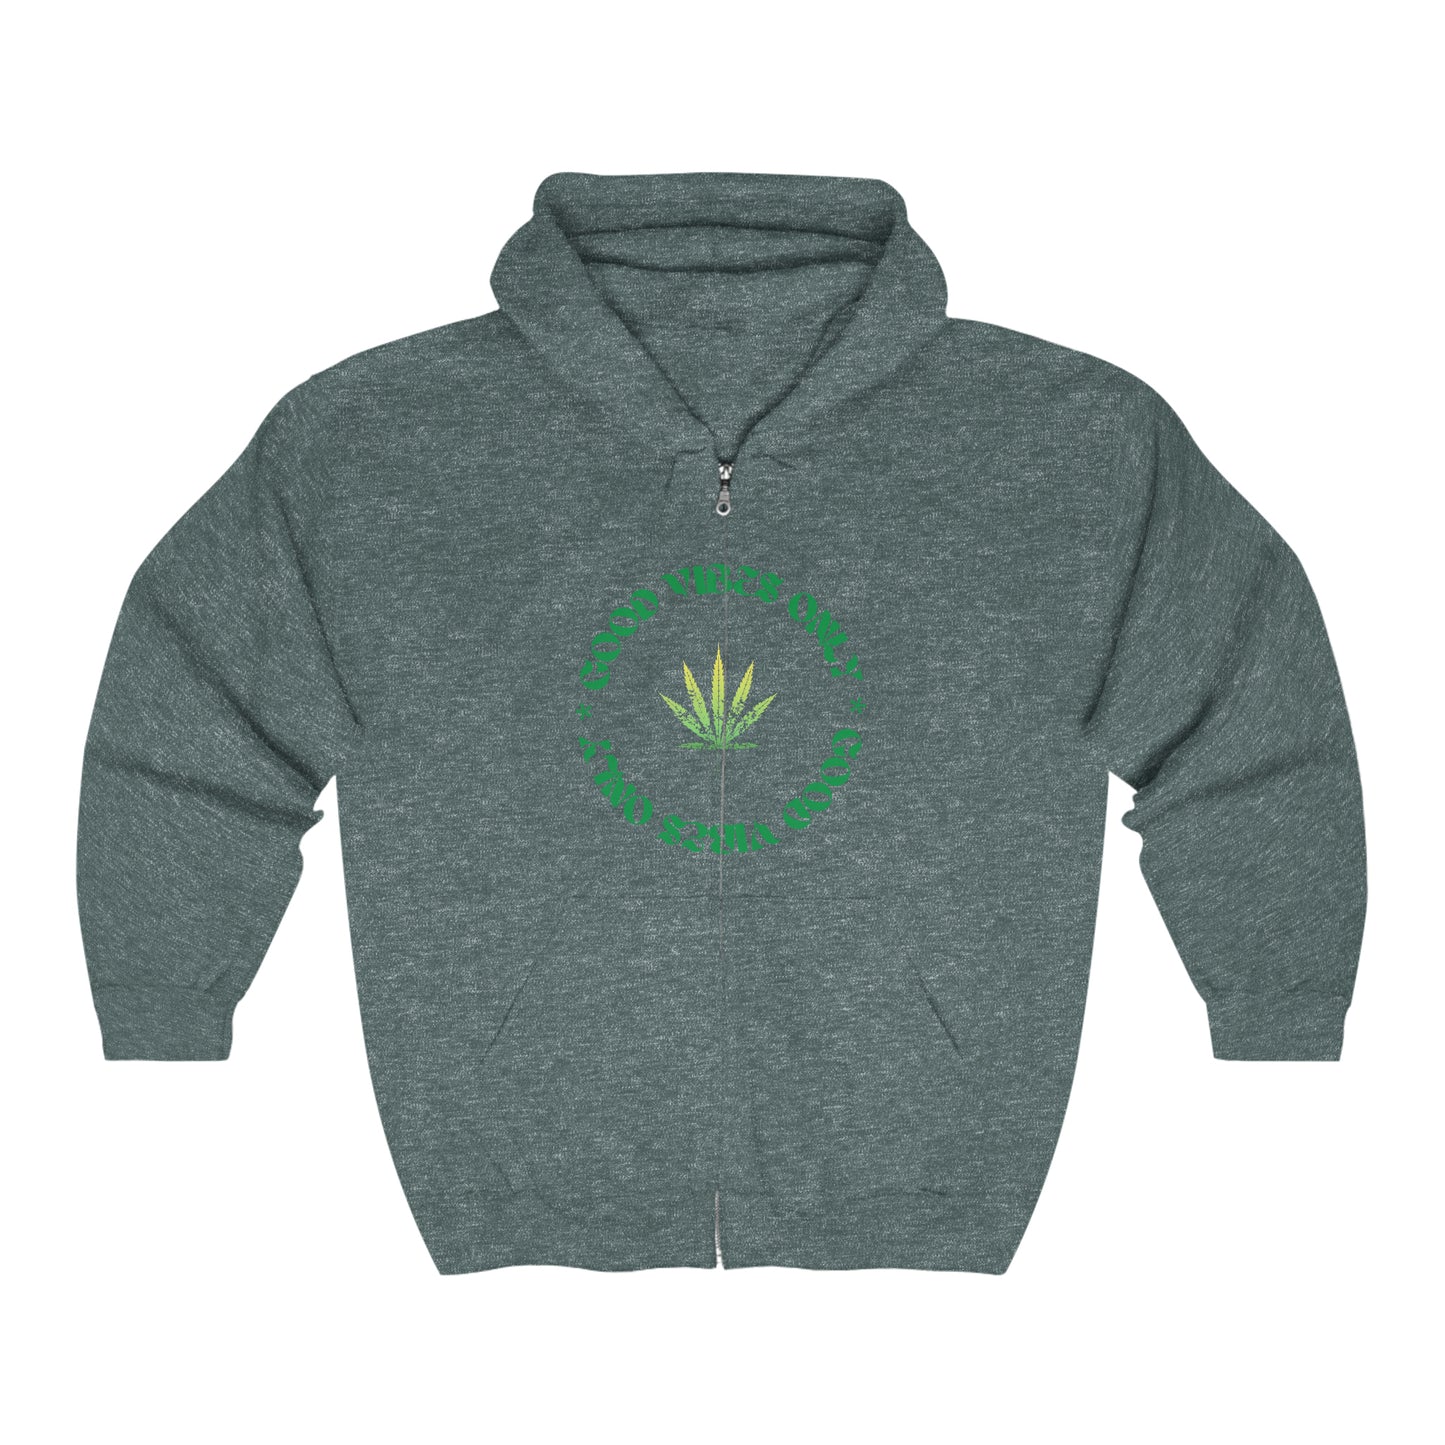 A Good Vibes Only Full Zip cannabis Hoodie with a green marijuana leaf on it.